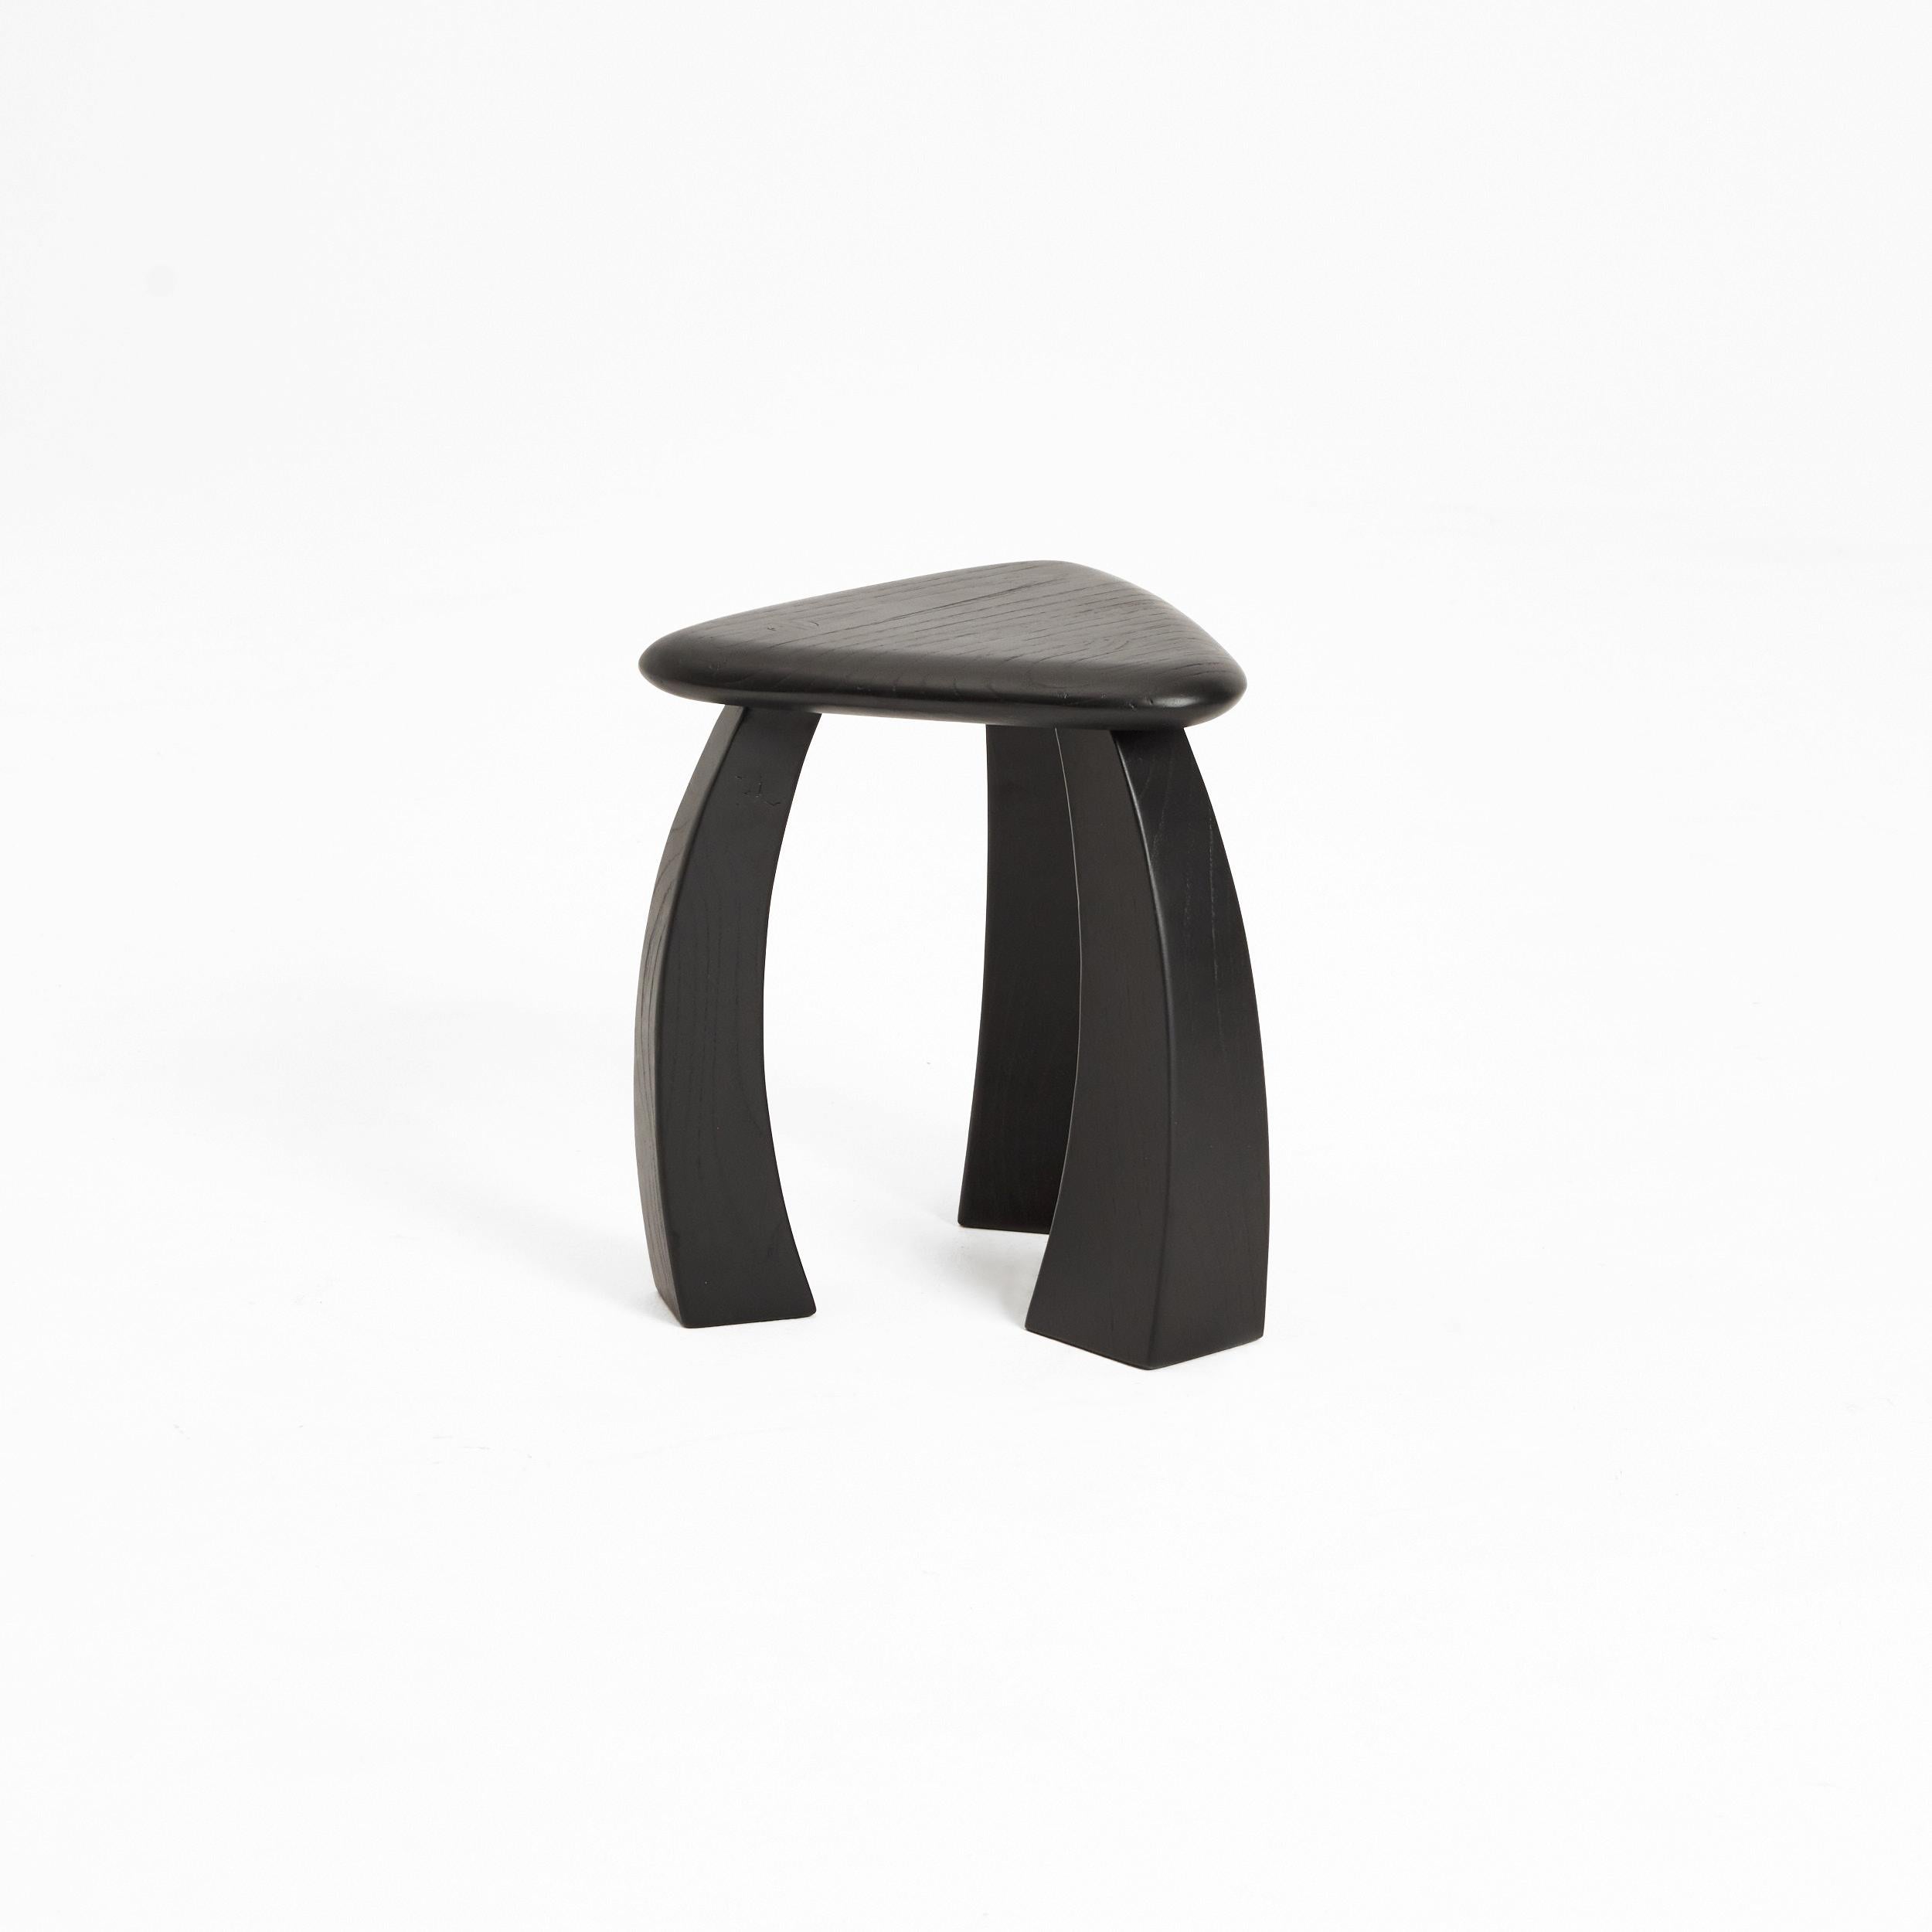 Arc de Stool '37 in black painted Chestnut Wood

Designed by Project 213A in 2022

The smaller version of the stool's legs curves inwards towards its triangular seat, fusing to showcase exquisite craftsmanship. The elegant complexion brings